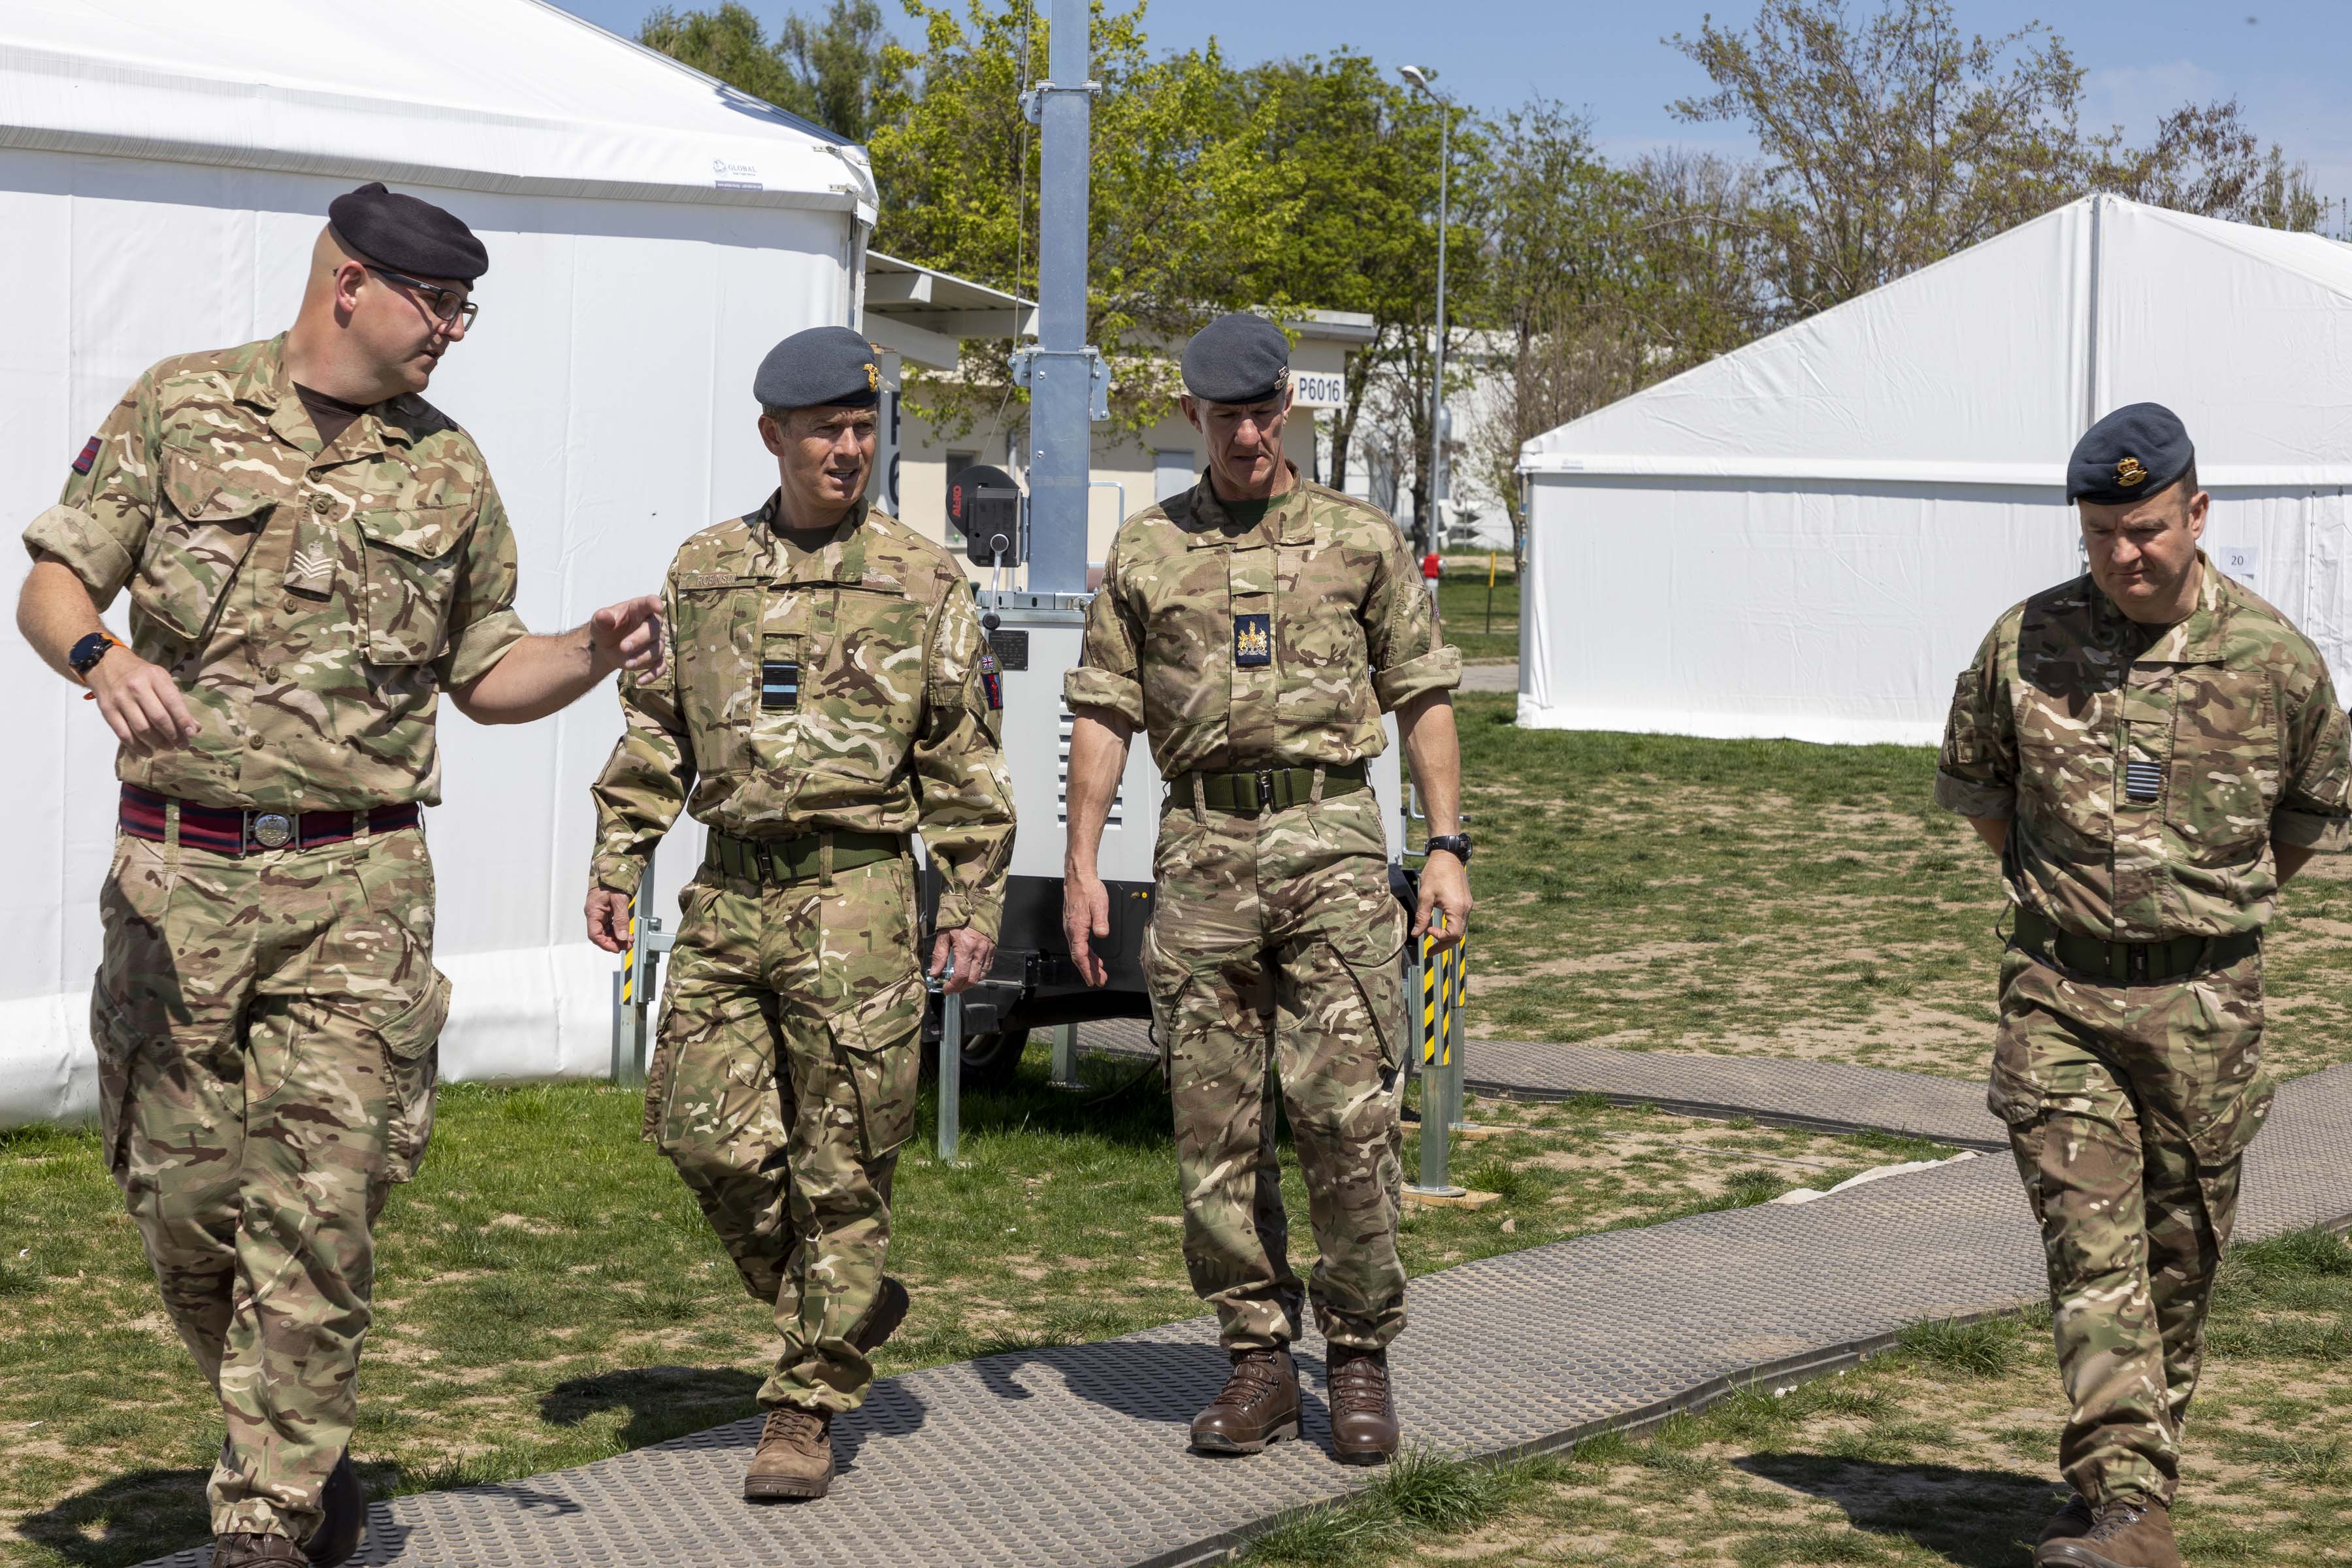 RAF Personnel walking by temporary buildings.